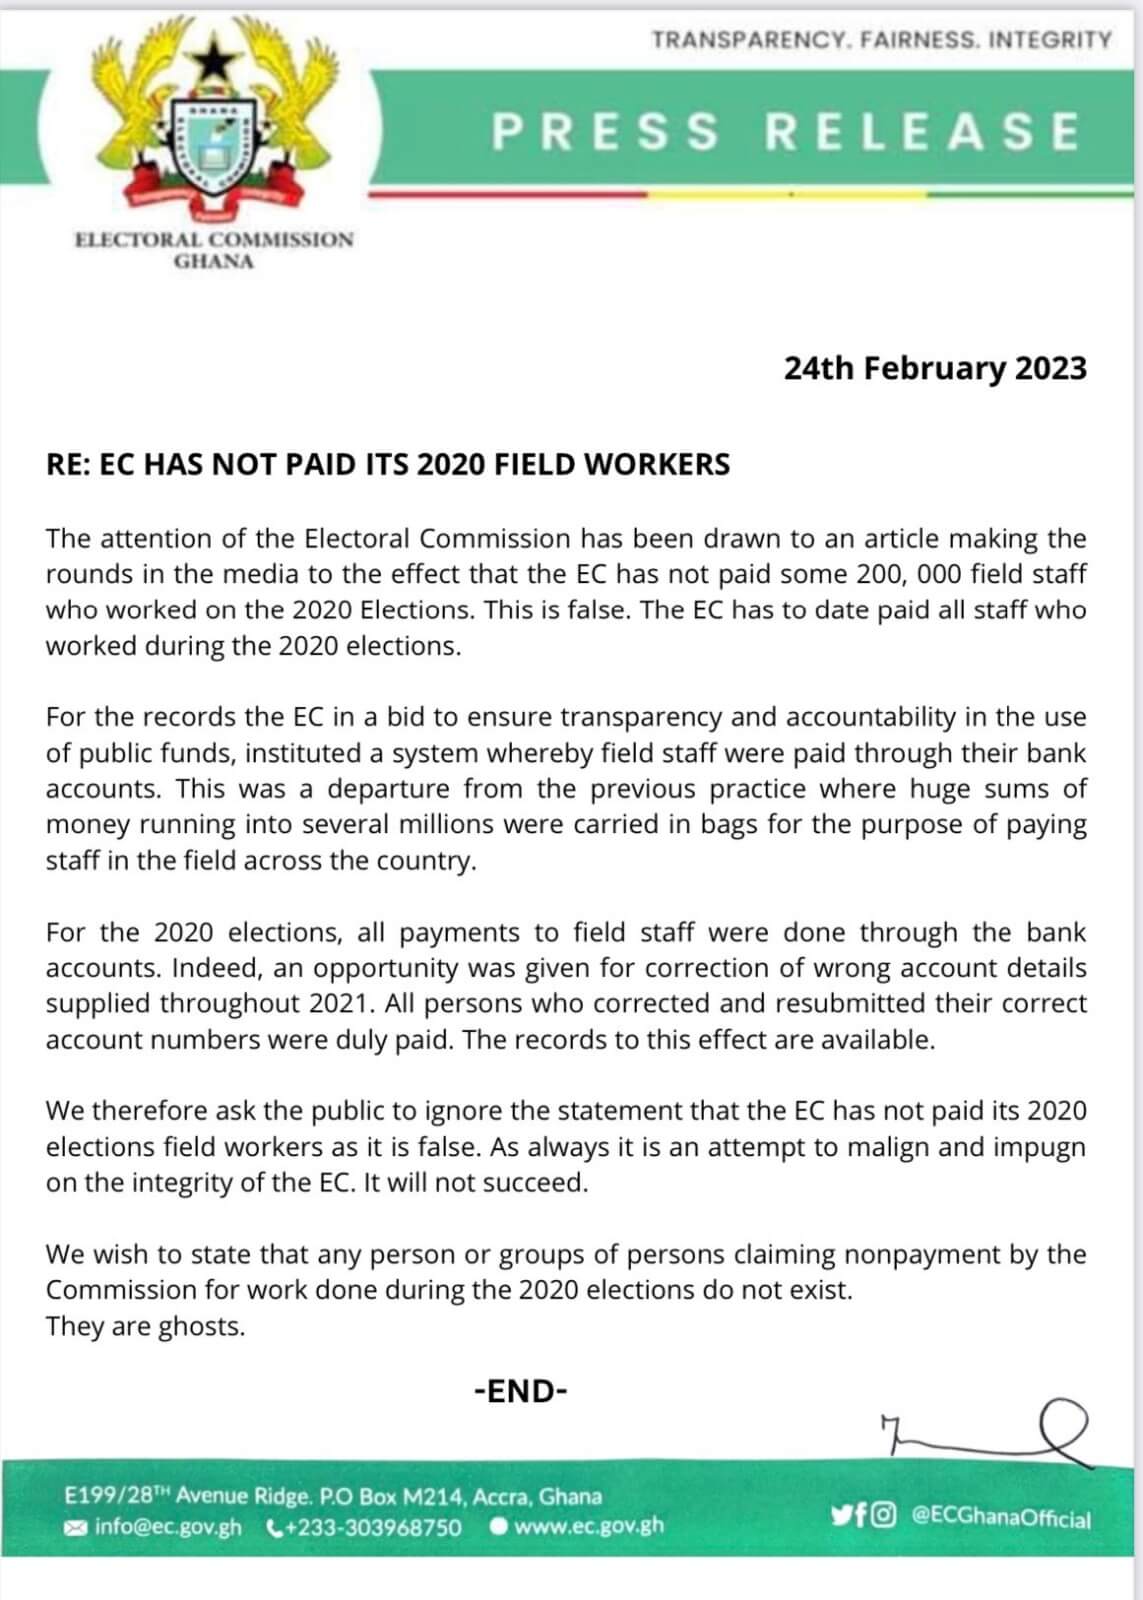 EC Responds To Claims Of Unpaid 2020 Field Workers